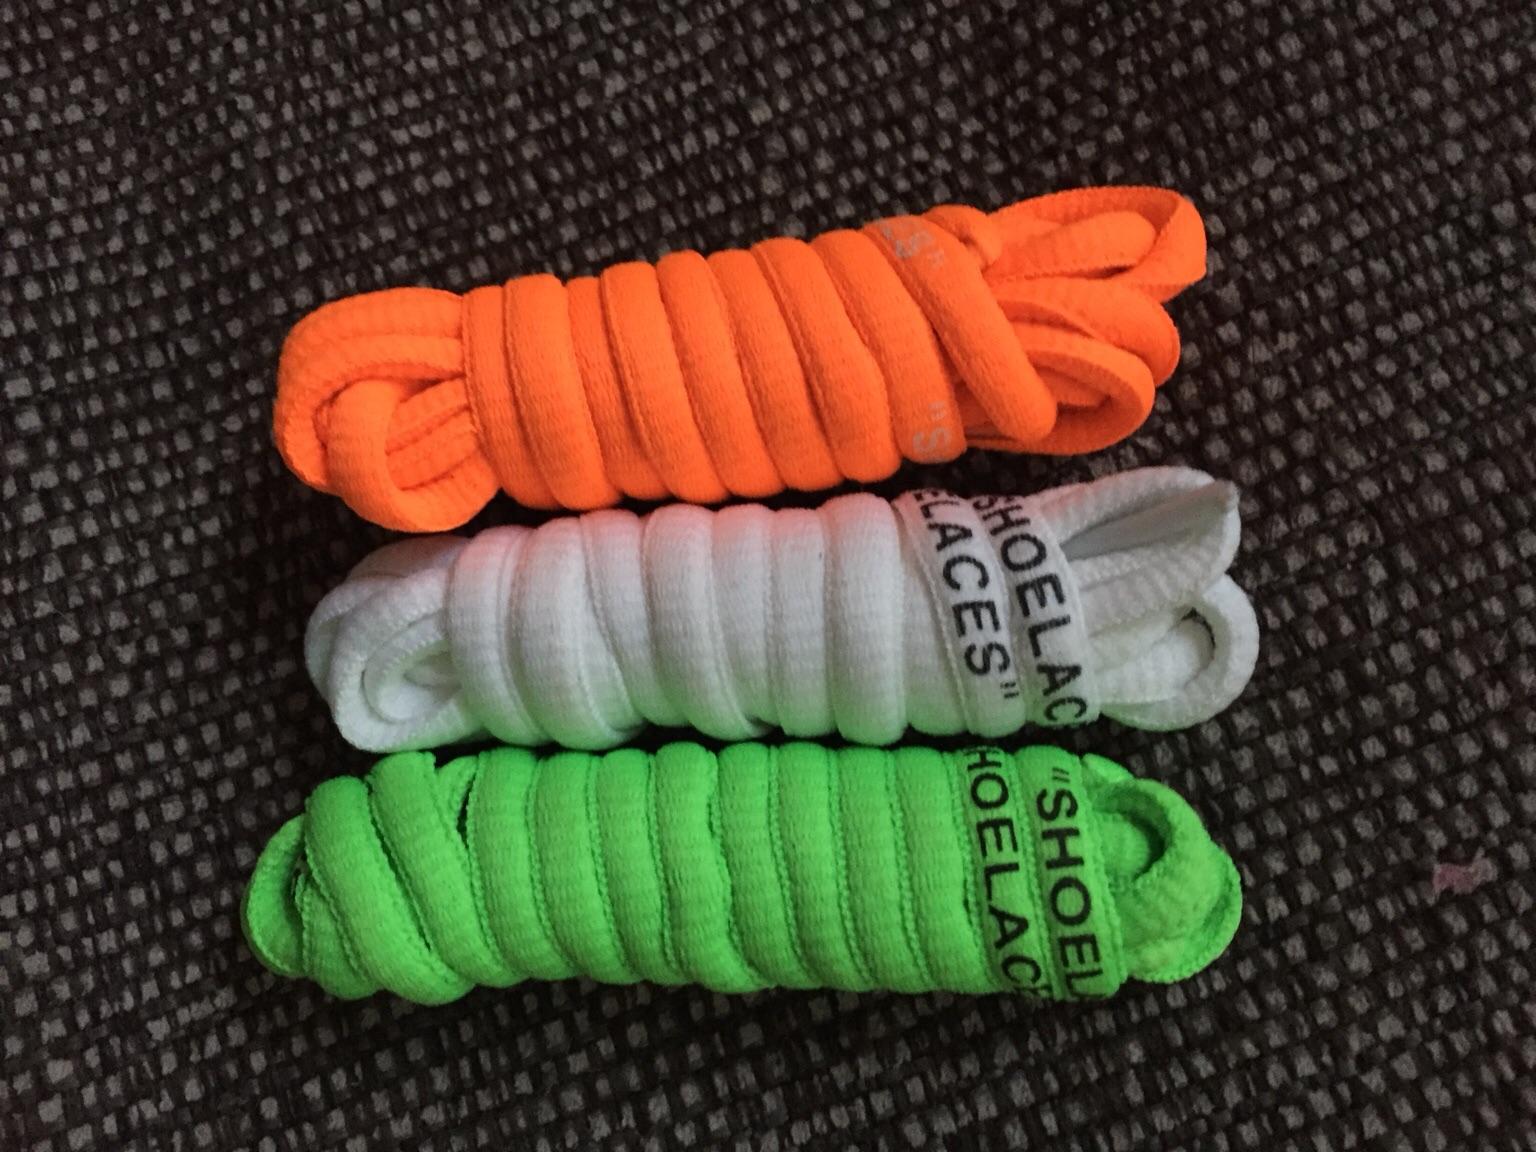 OFF WHITE NIKE AIR VAPORMAX LACES in 